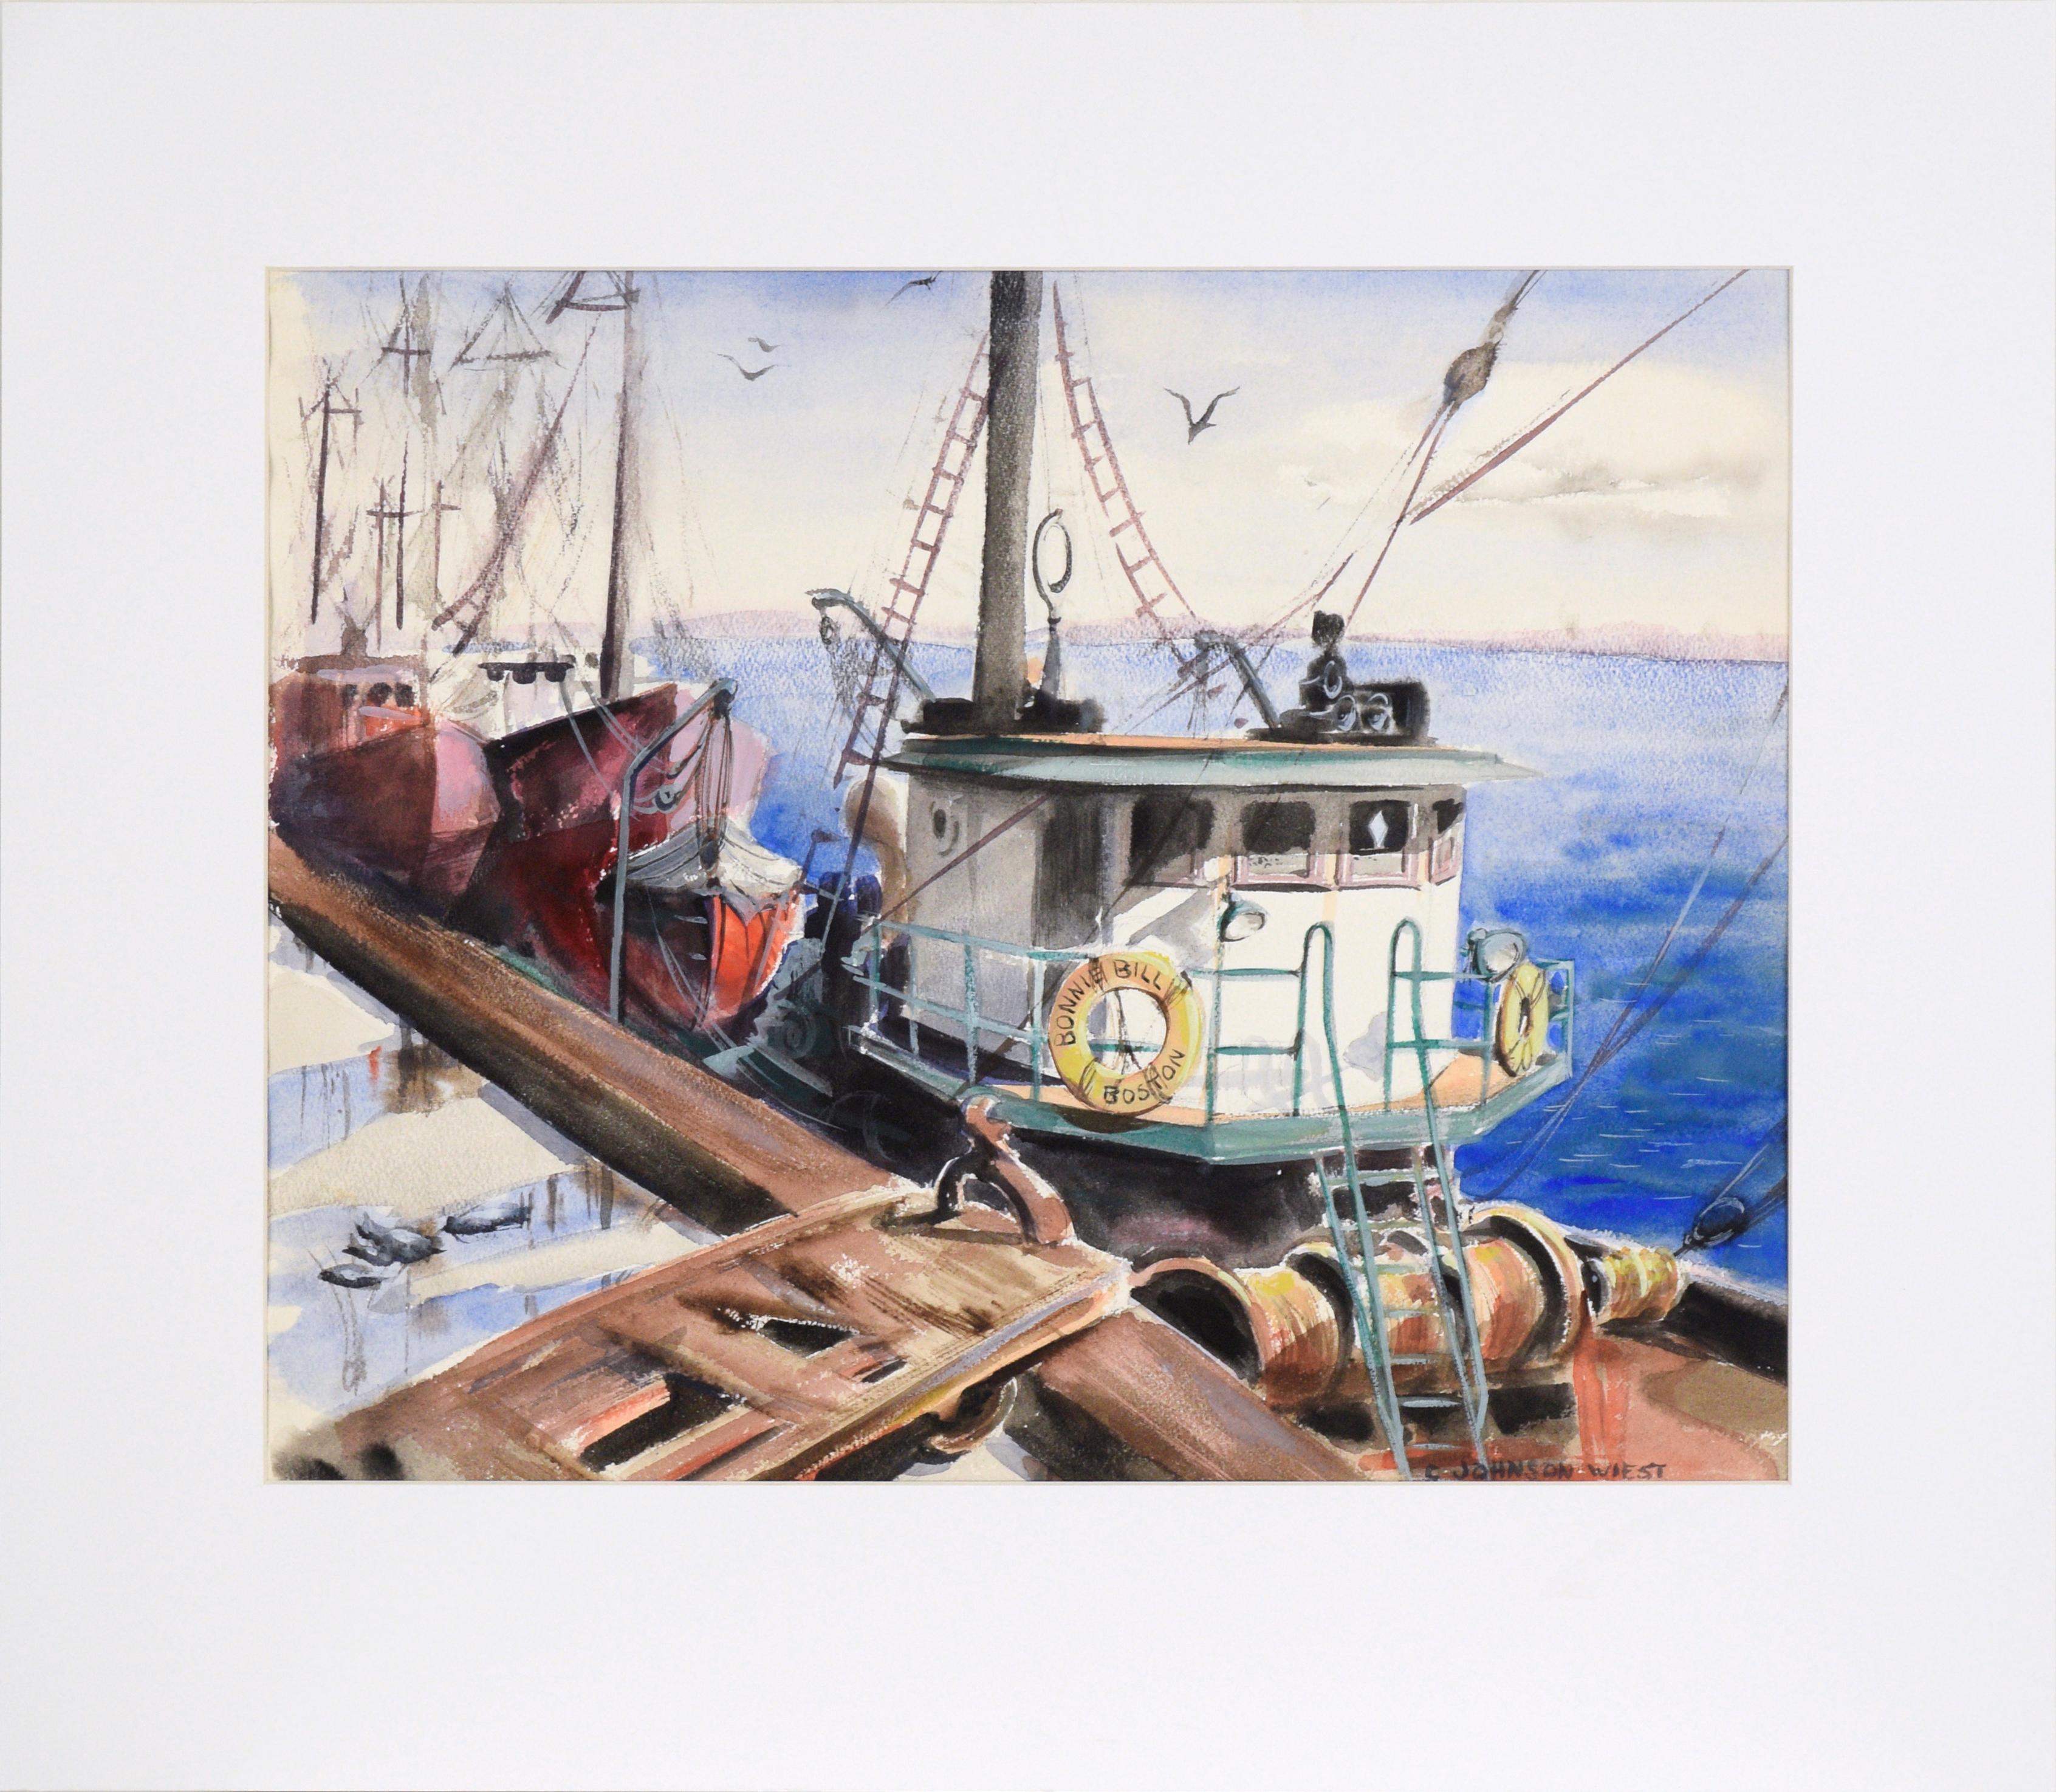 Claire Weist Landscape Art - Bonnie Bill  - Tugboat at the Dock in Boston - Seascape in Watercolor on Paper 